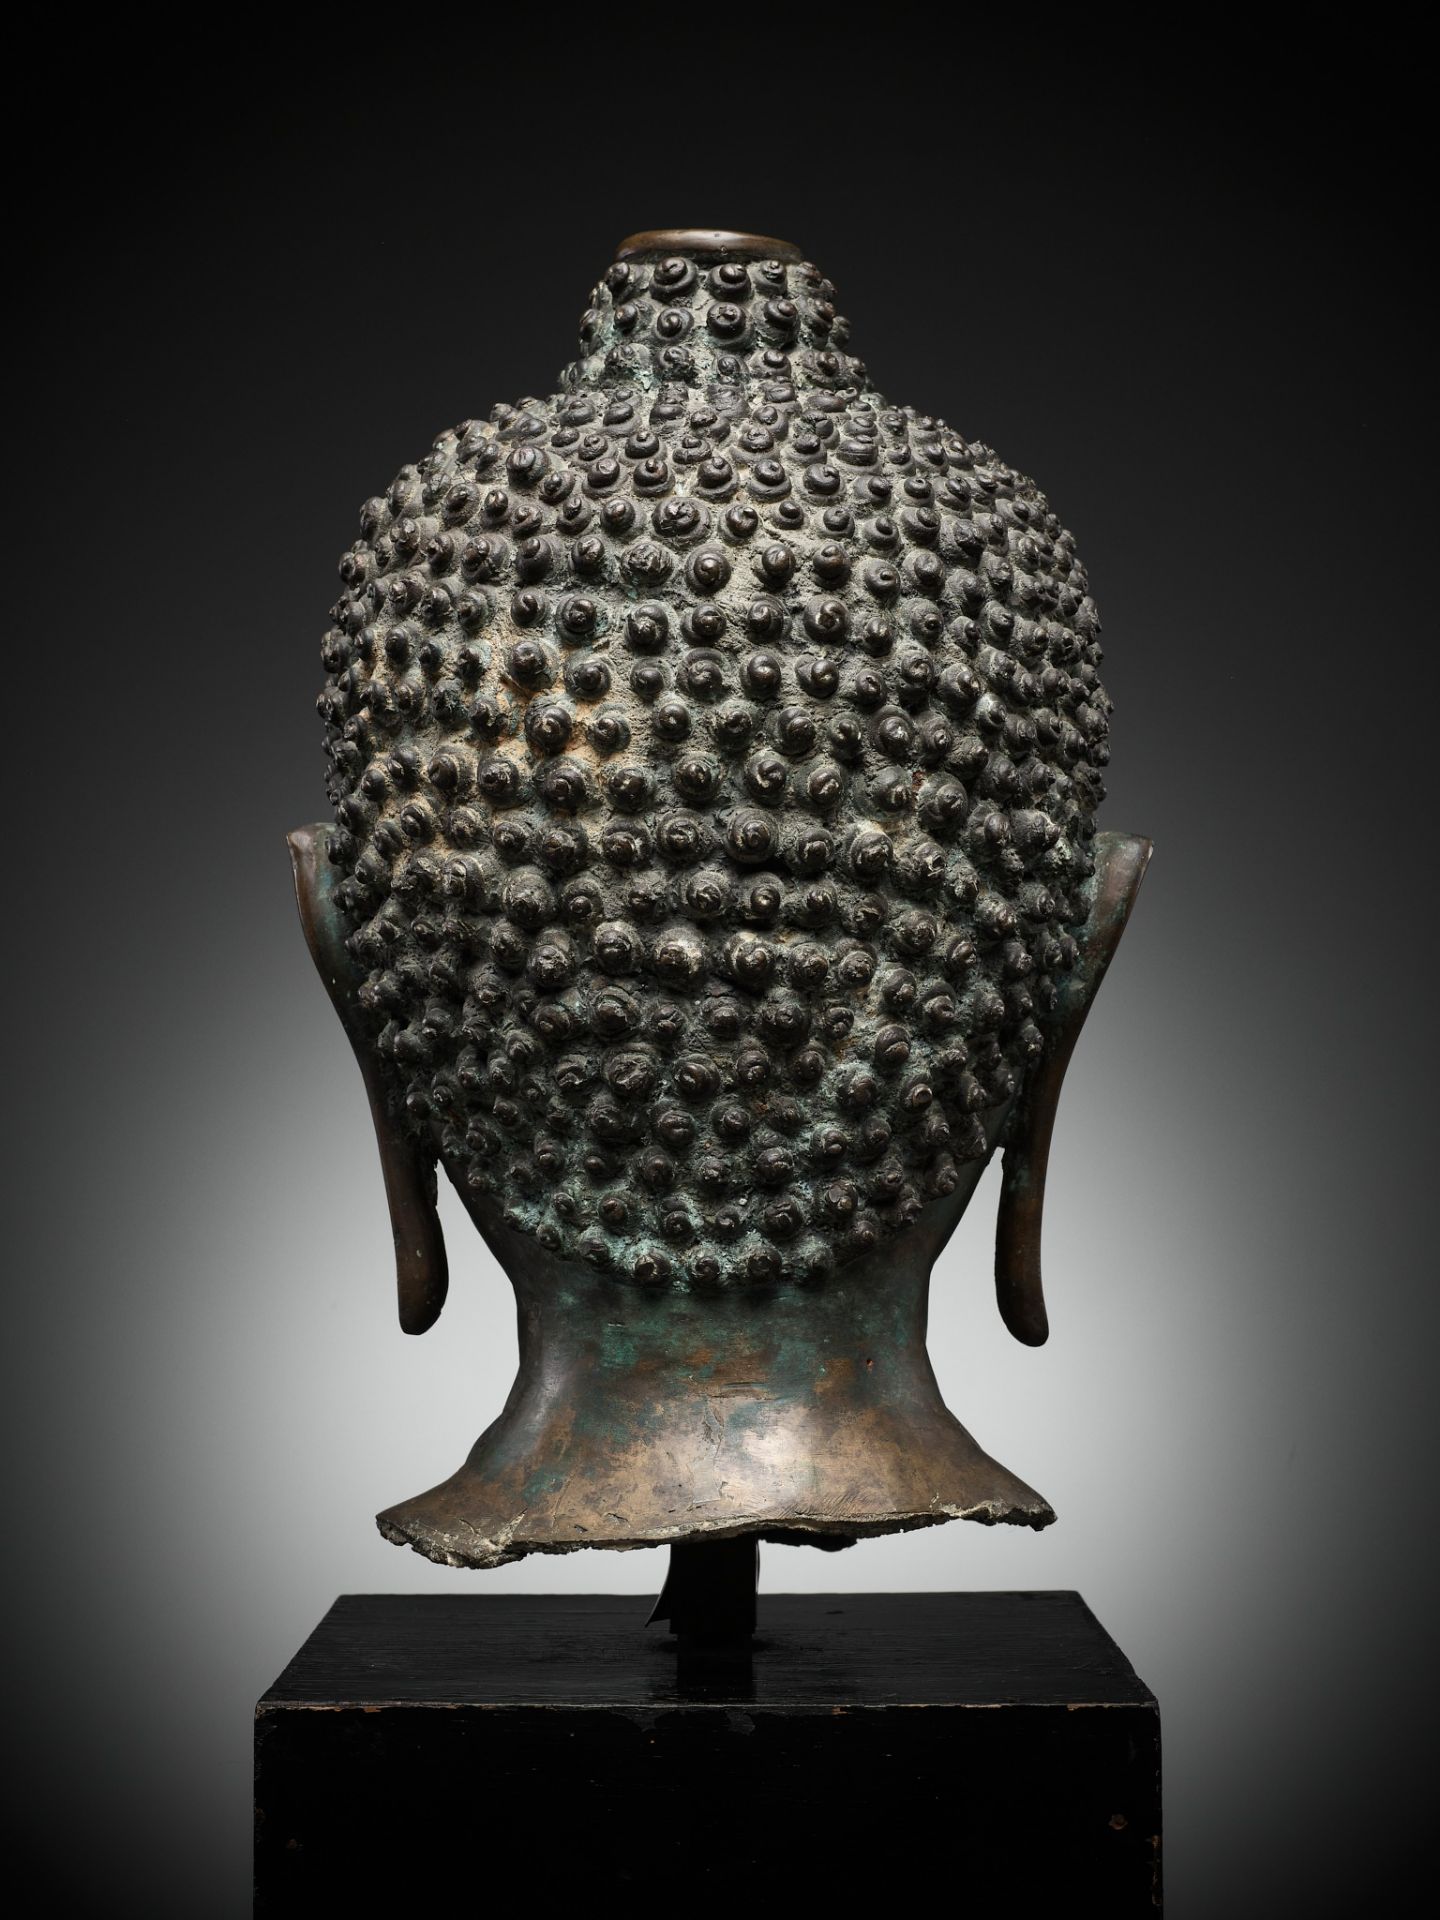 A MONUMENTAL BRONZE HEAD OF BUDDHA, LAN NA, NORTHERN THAILAND, 14TH-15th CENTURY - Image 11 of 16